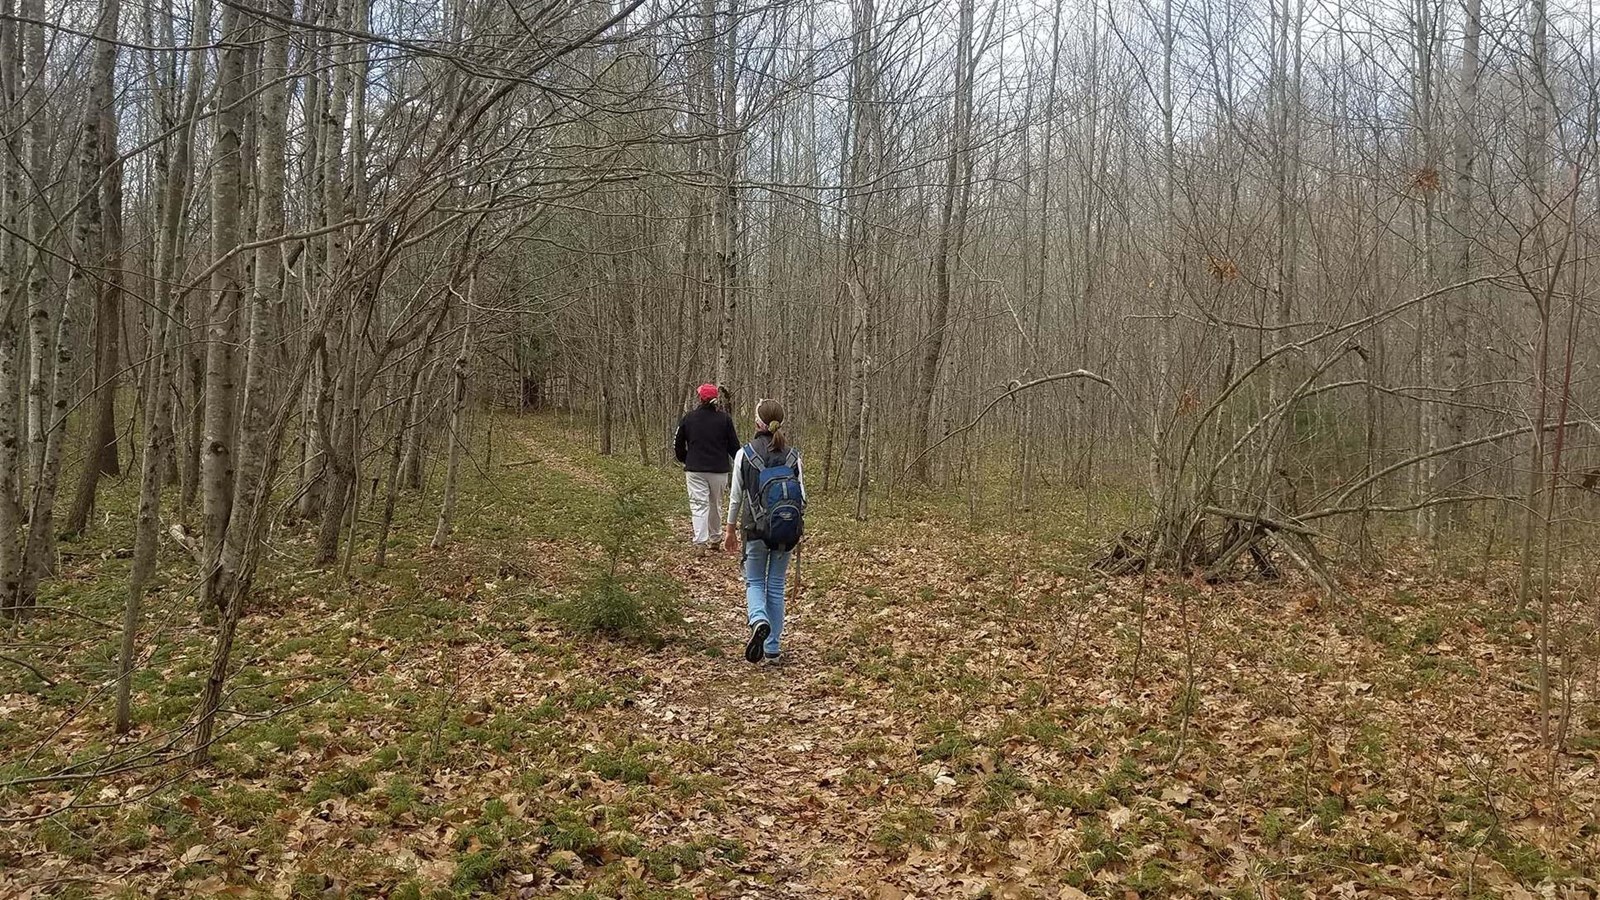 Two hikers walk on the trail through open forest